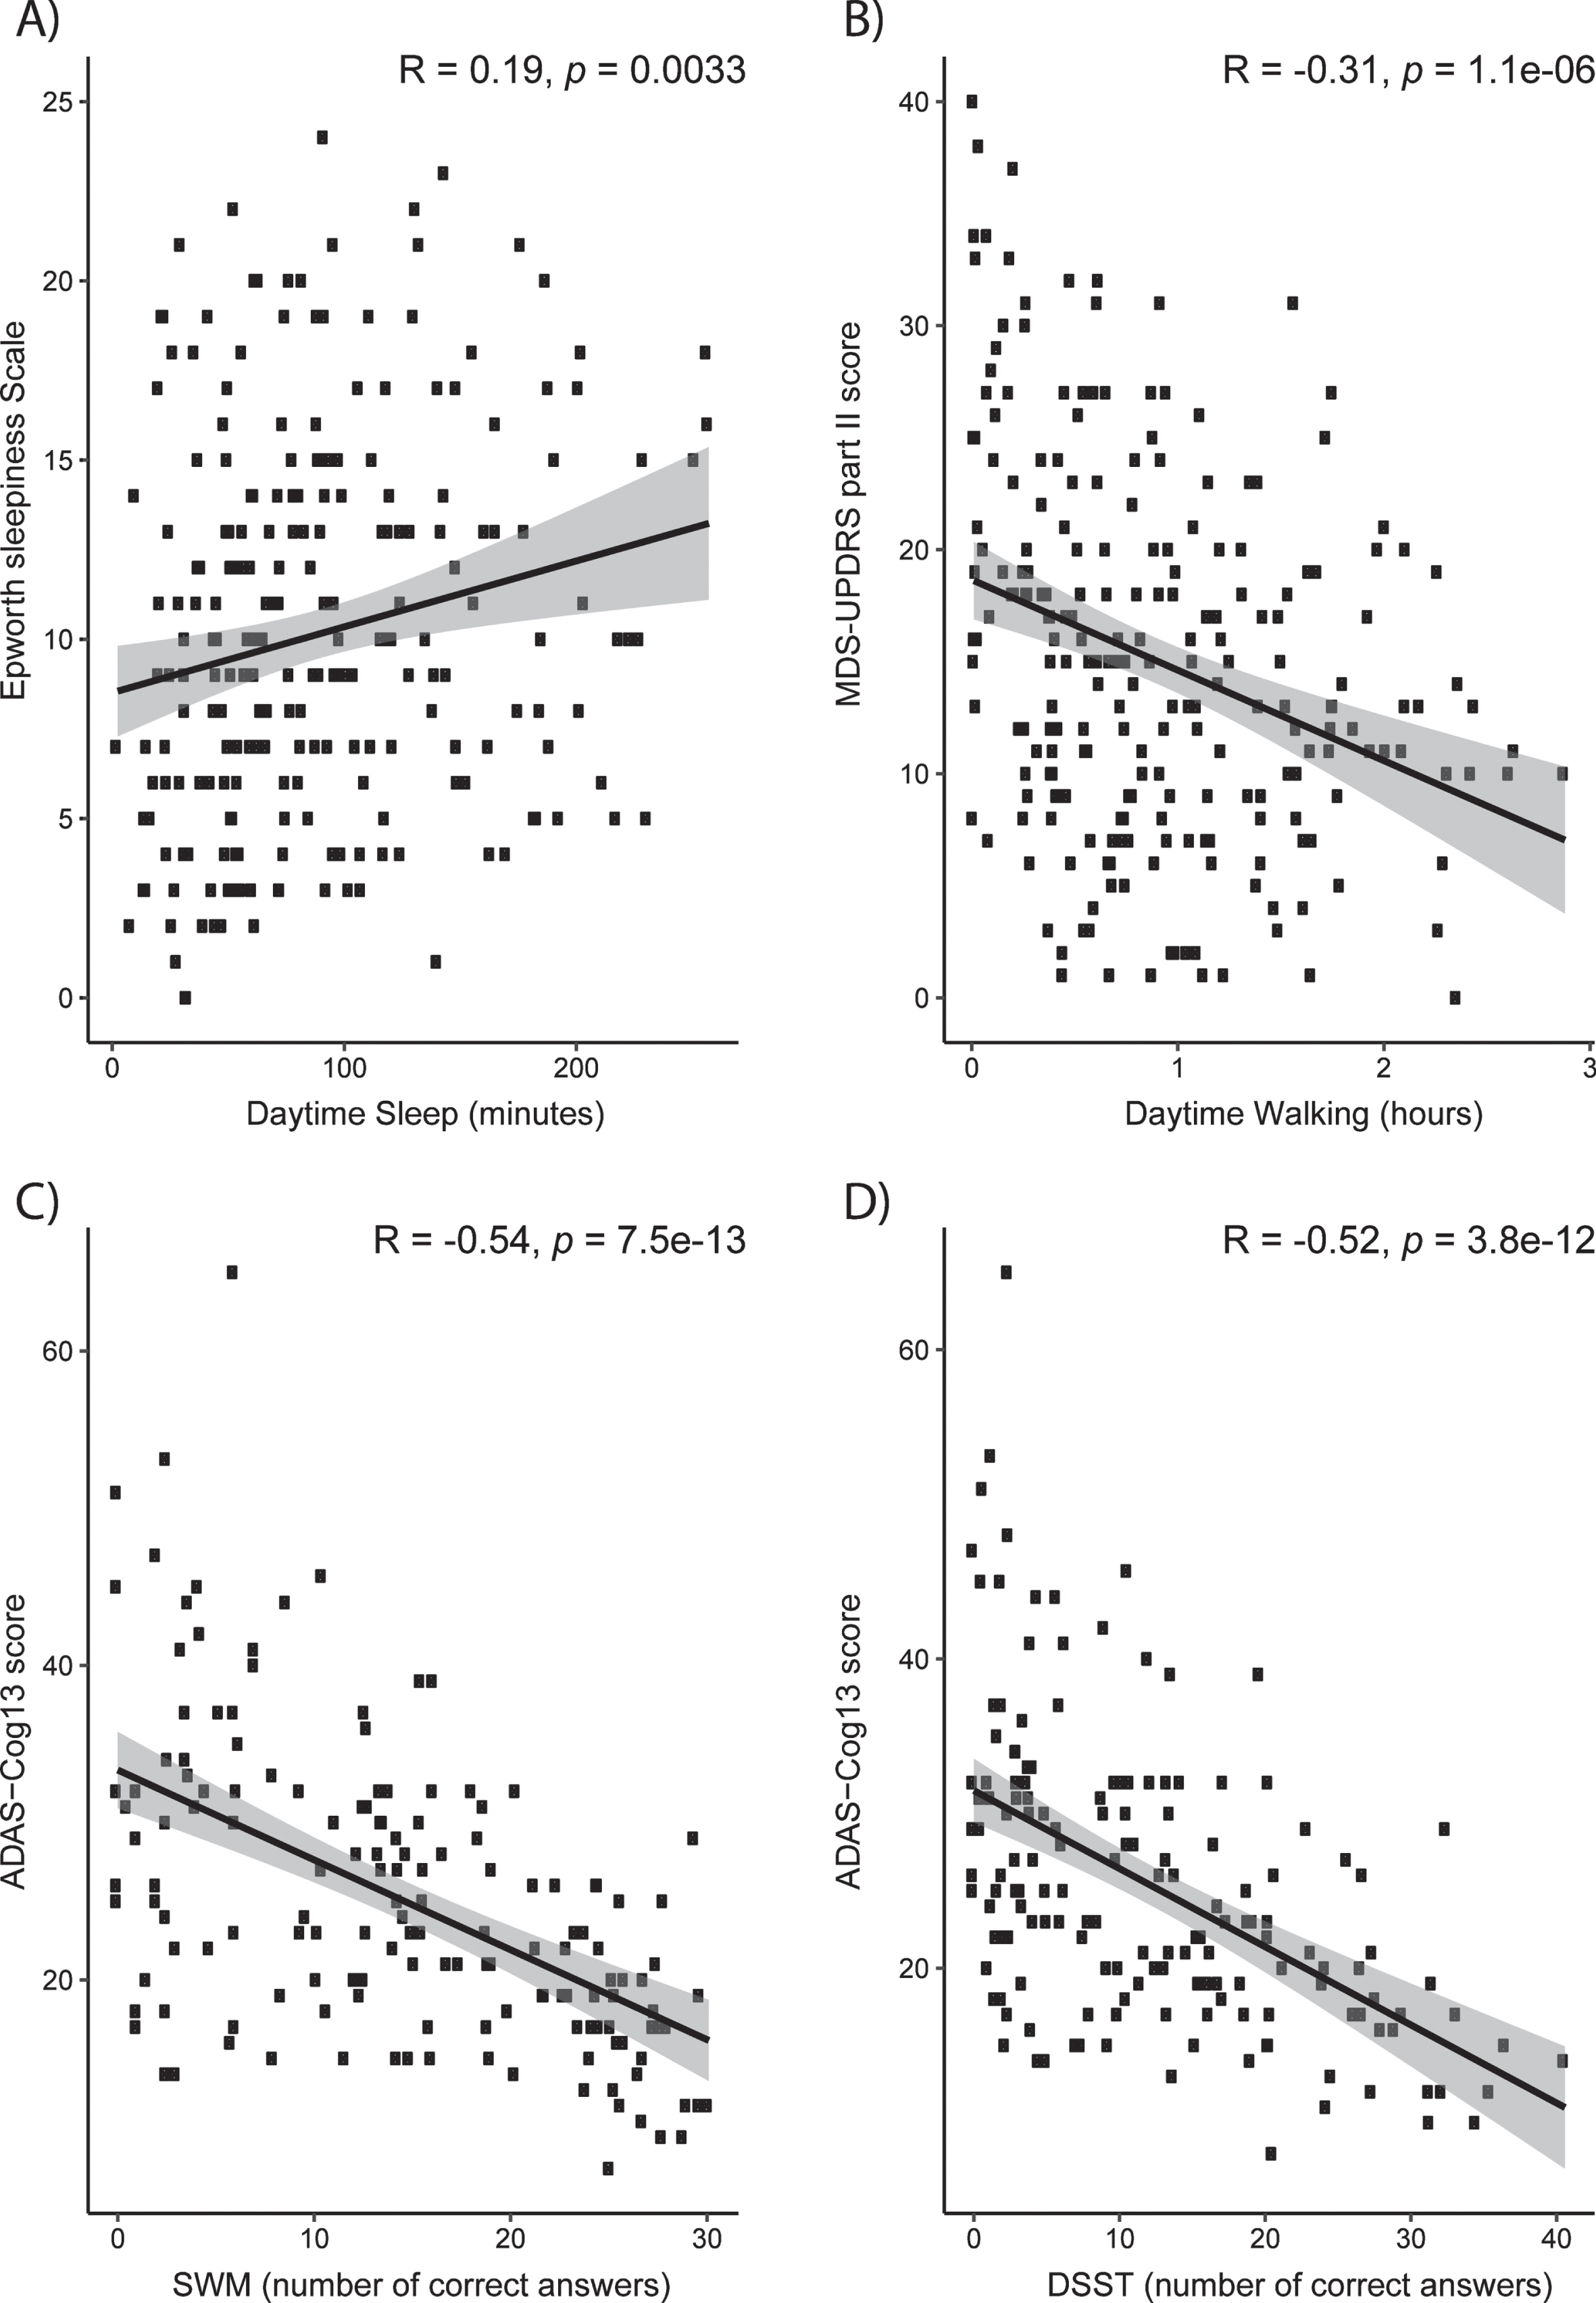 Clinical relevance of digital measures at baseline. Correlations between clinical assessments and Actigraphy (A and B) and iPad trial (C and D) assessments. A) Actigraphy-measured daytime sleep positively correlates with Epworth Sleepiness Scale score. B) Physical activity correlates with improvement on MDS-UPDRS Part II. C) Better scores of SWM correlate with lower ADAS-Cog13. D) Better scores of DSST correlate with lower ADAS-Cog13. ADAS-Cog13, Alzheimer Disease Assessment Scale –Cognitive 13-Item Scale; DSST, digital symbol substitution; MDS, Movement Disorder Society–owned rating scales; SWM, spatial working memory; UPDRS, Unified Parkinson Disease Rating Scale.